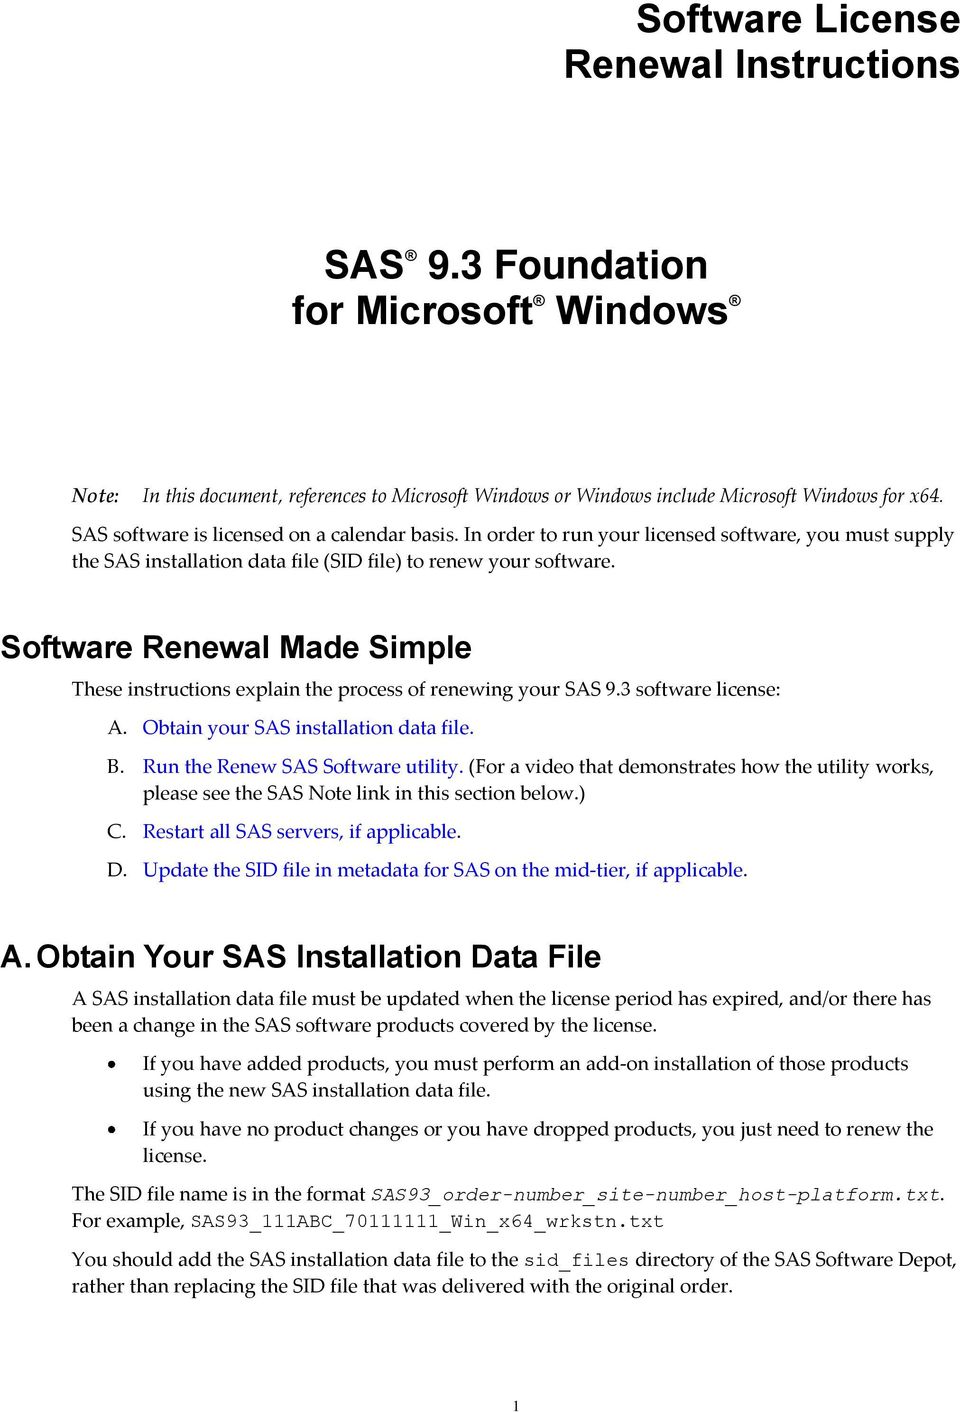 Software Renewal Made Simple These instructions explain the process of renewing your SAS 9.3 software license: A. Obtain your SAS installation data file. B. Run the Renew SAS Software utility.